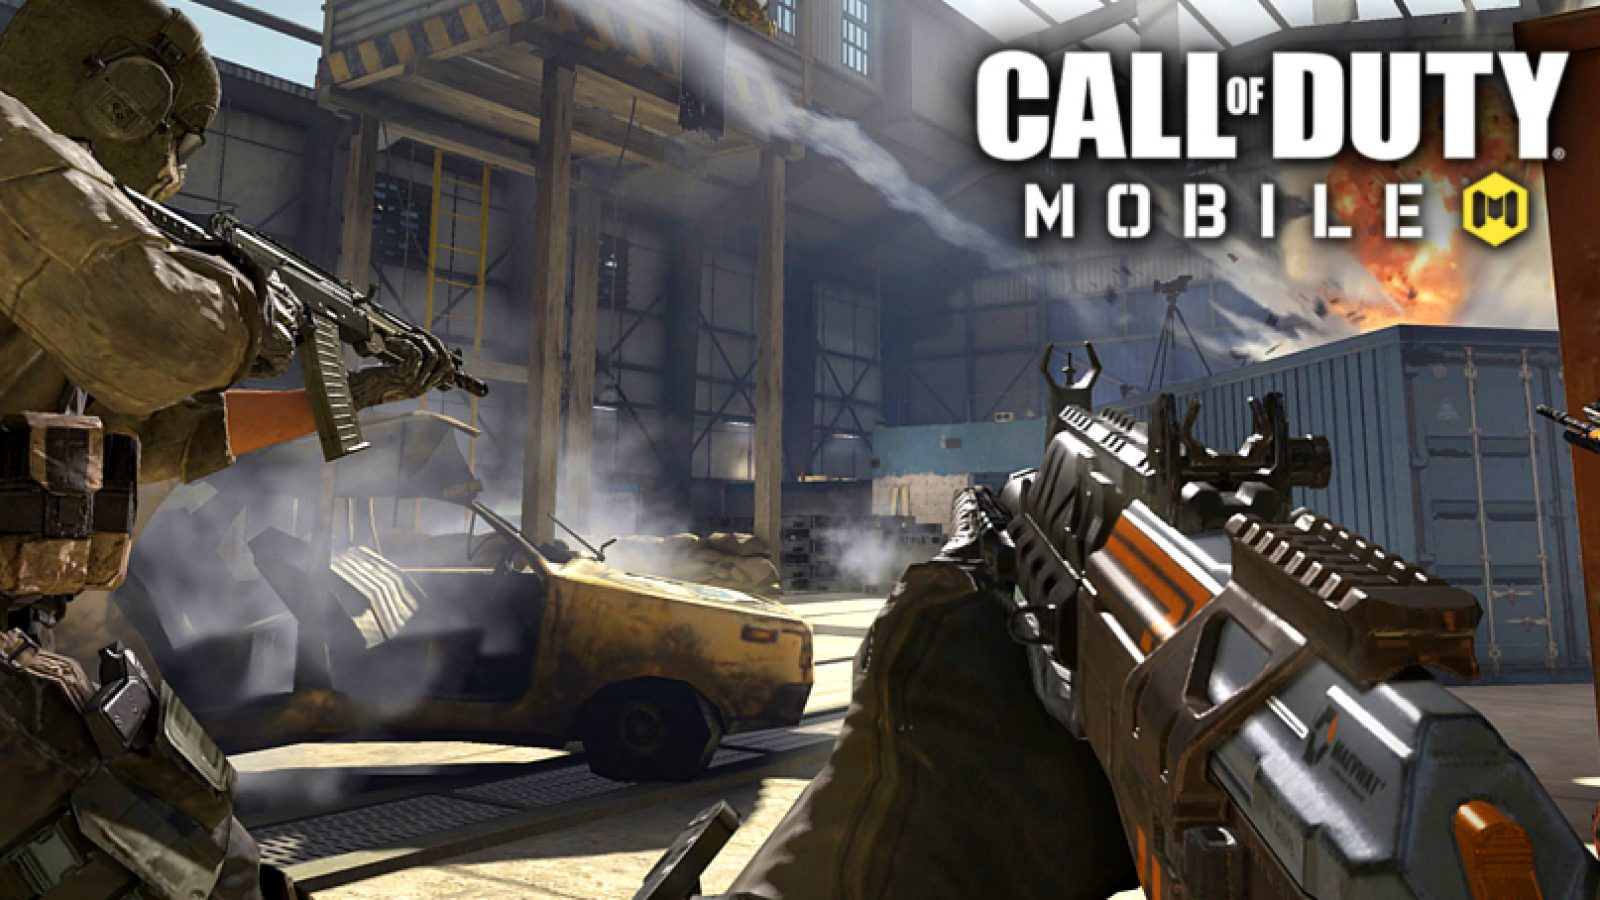 Call of duty mobile cod. Call of Duty мобайл. Call of Duty 4 mobile. Call of Duty mobile 2020. Call of Duty mobile Battle Royale.